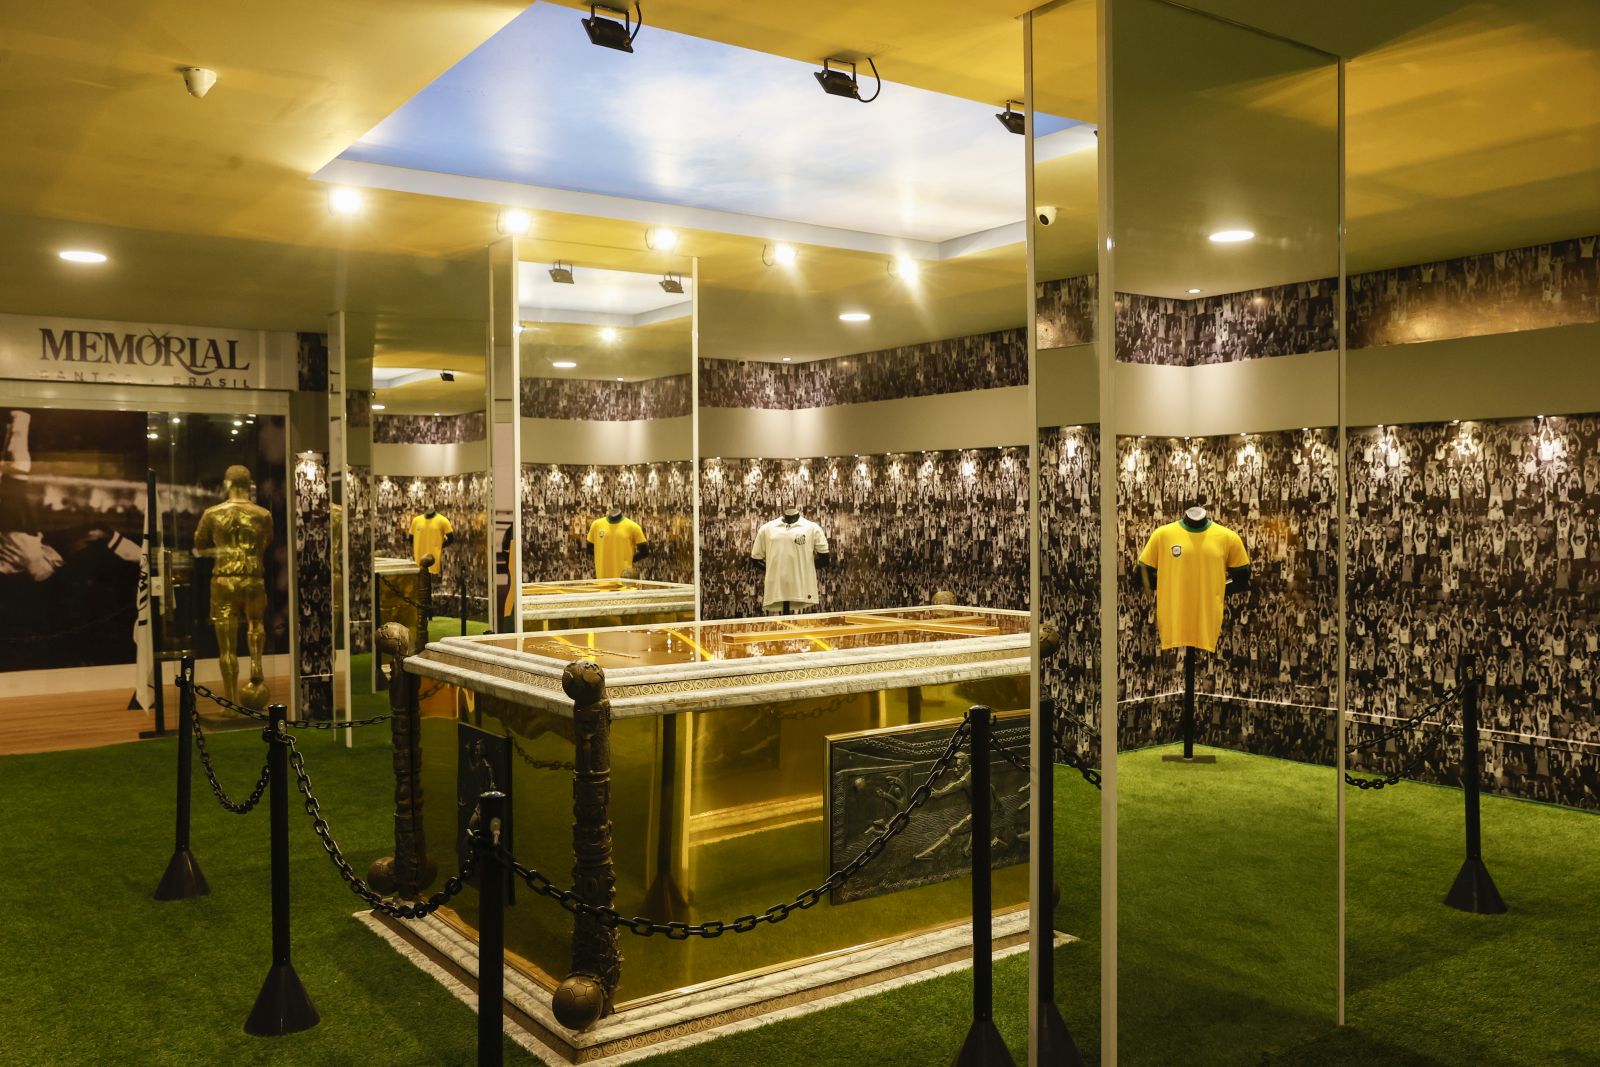 epa10630018 Part of the mausoleum where soccer legend Pele is buried, in Santos, Brazil, 15 May 2023. The mausoleum where former Brazilian soccer legend Pele is buried opened its doors to the public on 15 May 2023. Pele died on 29 December 2022 at the age of 82.  EPA/Sebastiao Moreira